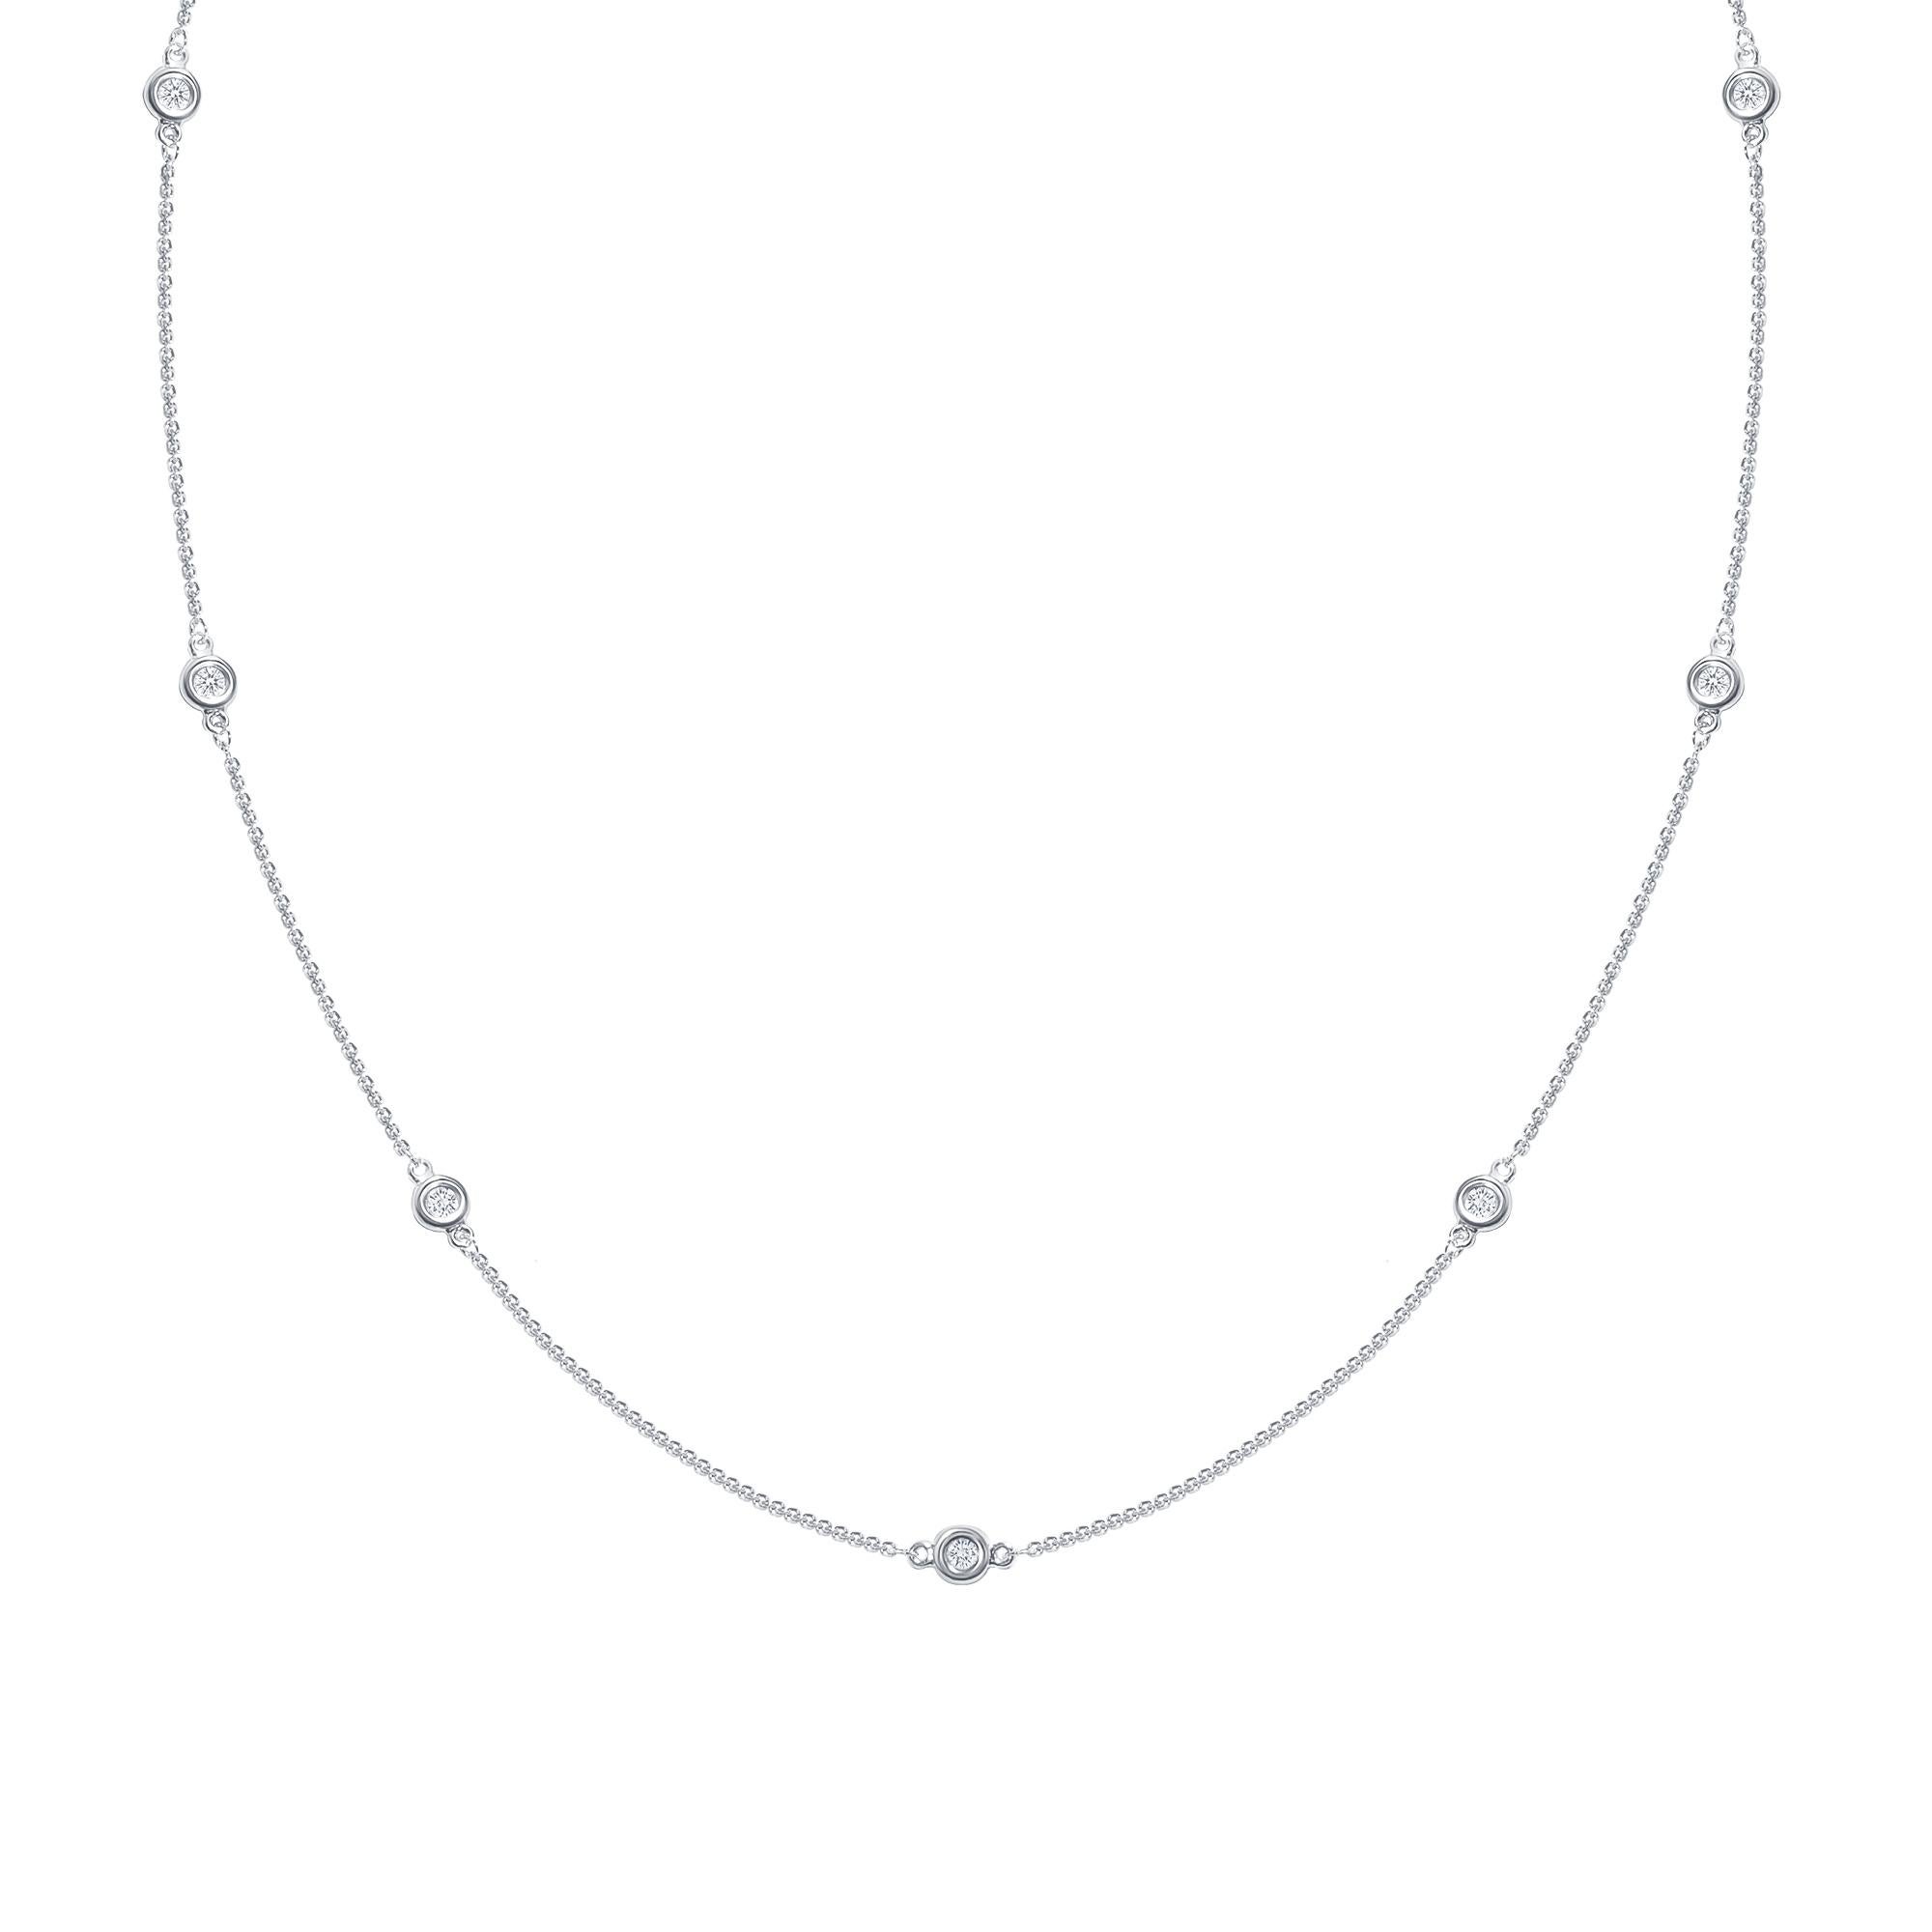 Eight elegant round diamonds set in a bezel setting along a 14k gold chain necklace.

Gold: 14K Gold
Number of Diamonds: Eight
Gold Color: White Gold
Carat: 1.5 Carat
Necklace Length: 20 Inches
Diamond Clarity: VS
Diamond Color: F
Chain Type: